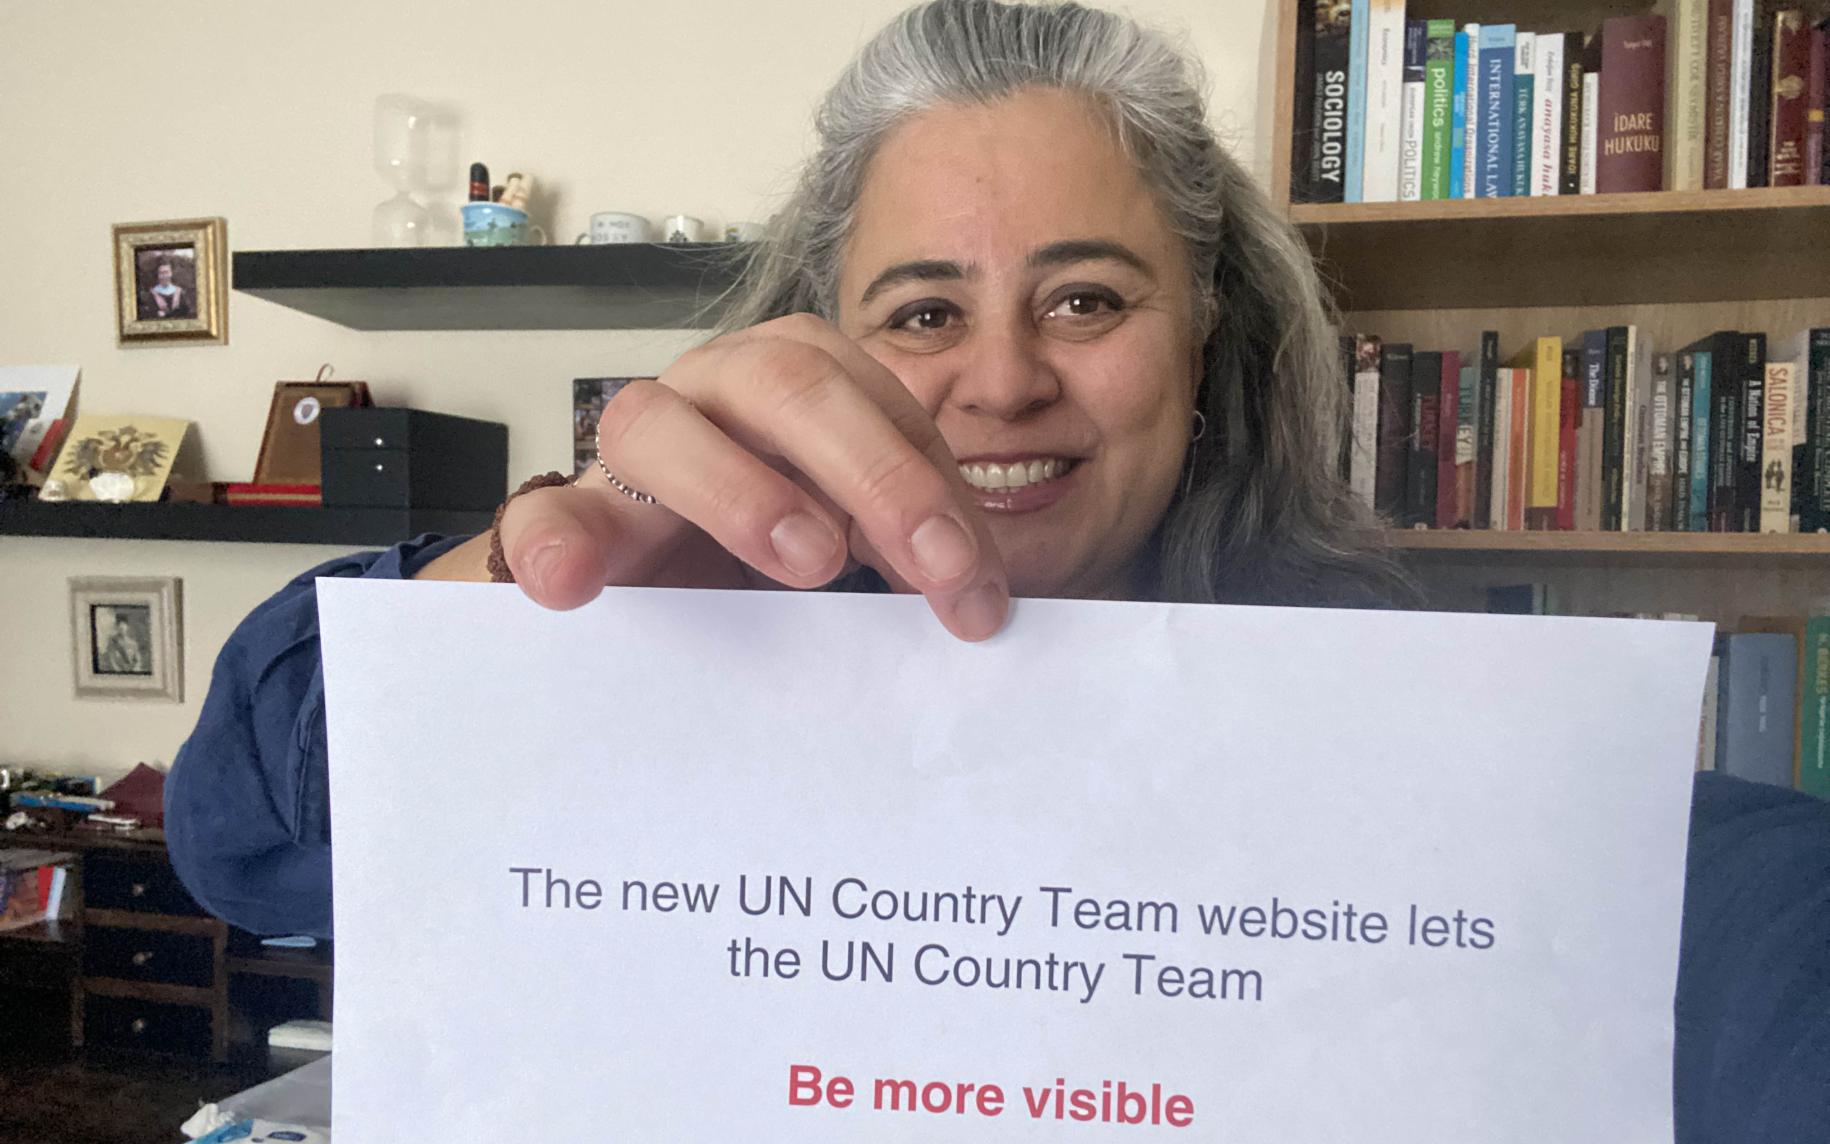 A woman smiles cheerfully at the camera as she holds a sign that reads "The new UN Country Team websites lets the UN Country Team BE MORE VISIBLE"